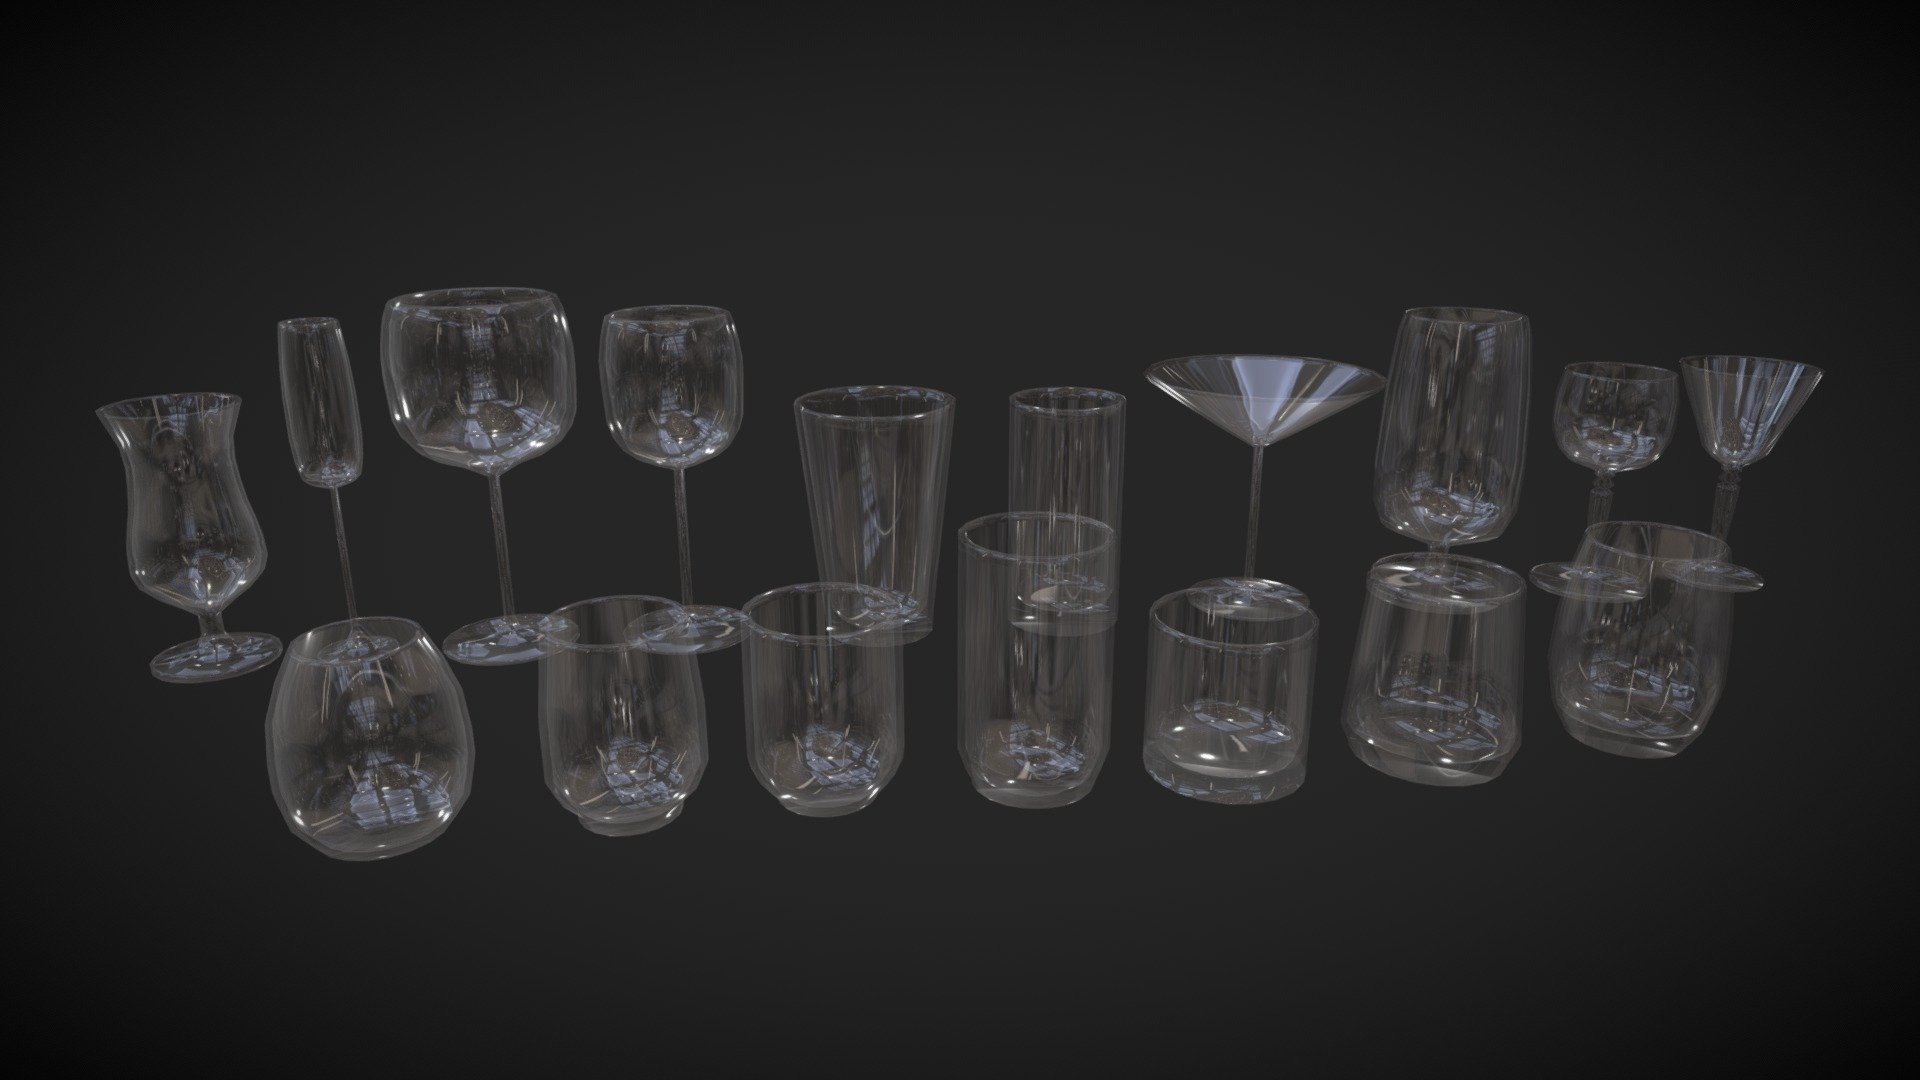 A simple Set of Drinking Glasses in a cool Lowpoly Style. You could use it for your next game or a littel Video. The lowpoly comic like style is timeless and cool you should try to create a video game with this kind of graphic style 3d model